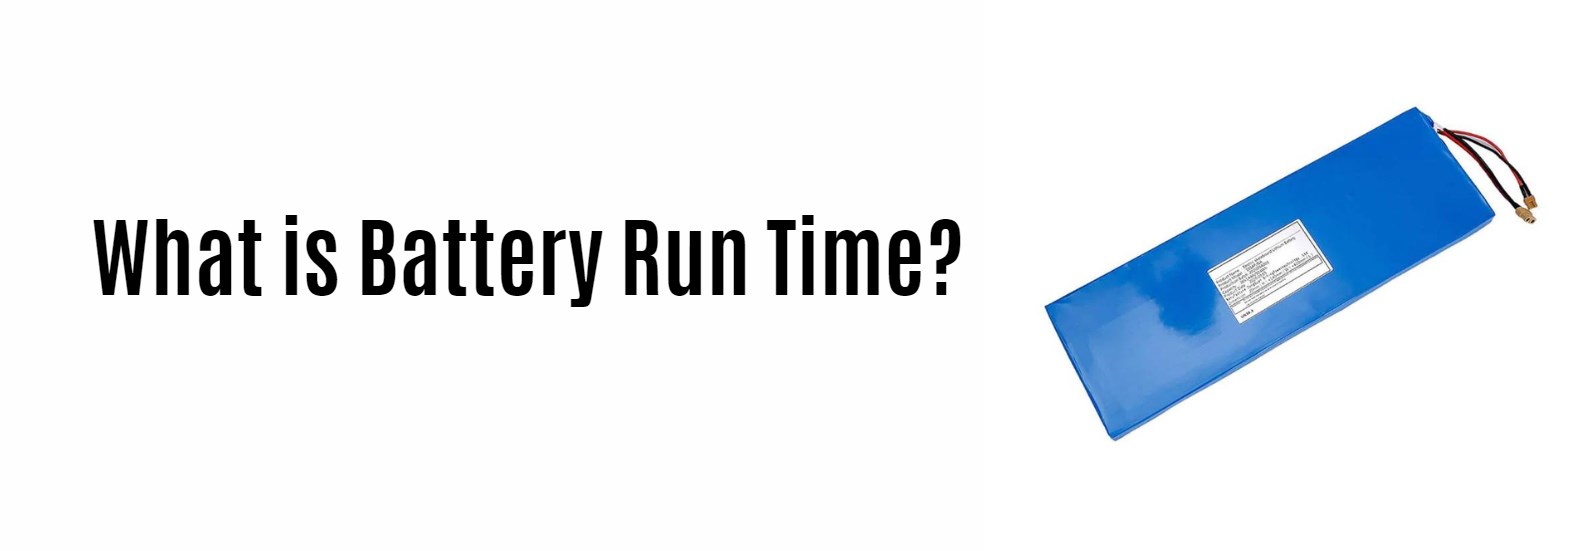 What is Battery Run Time?